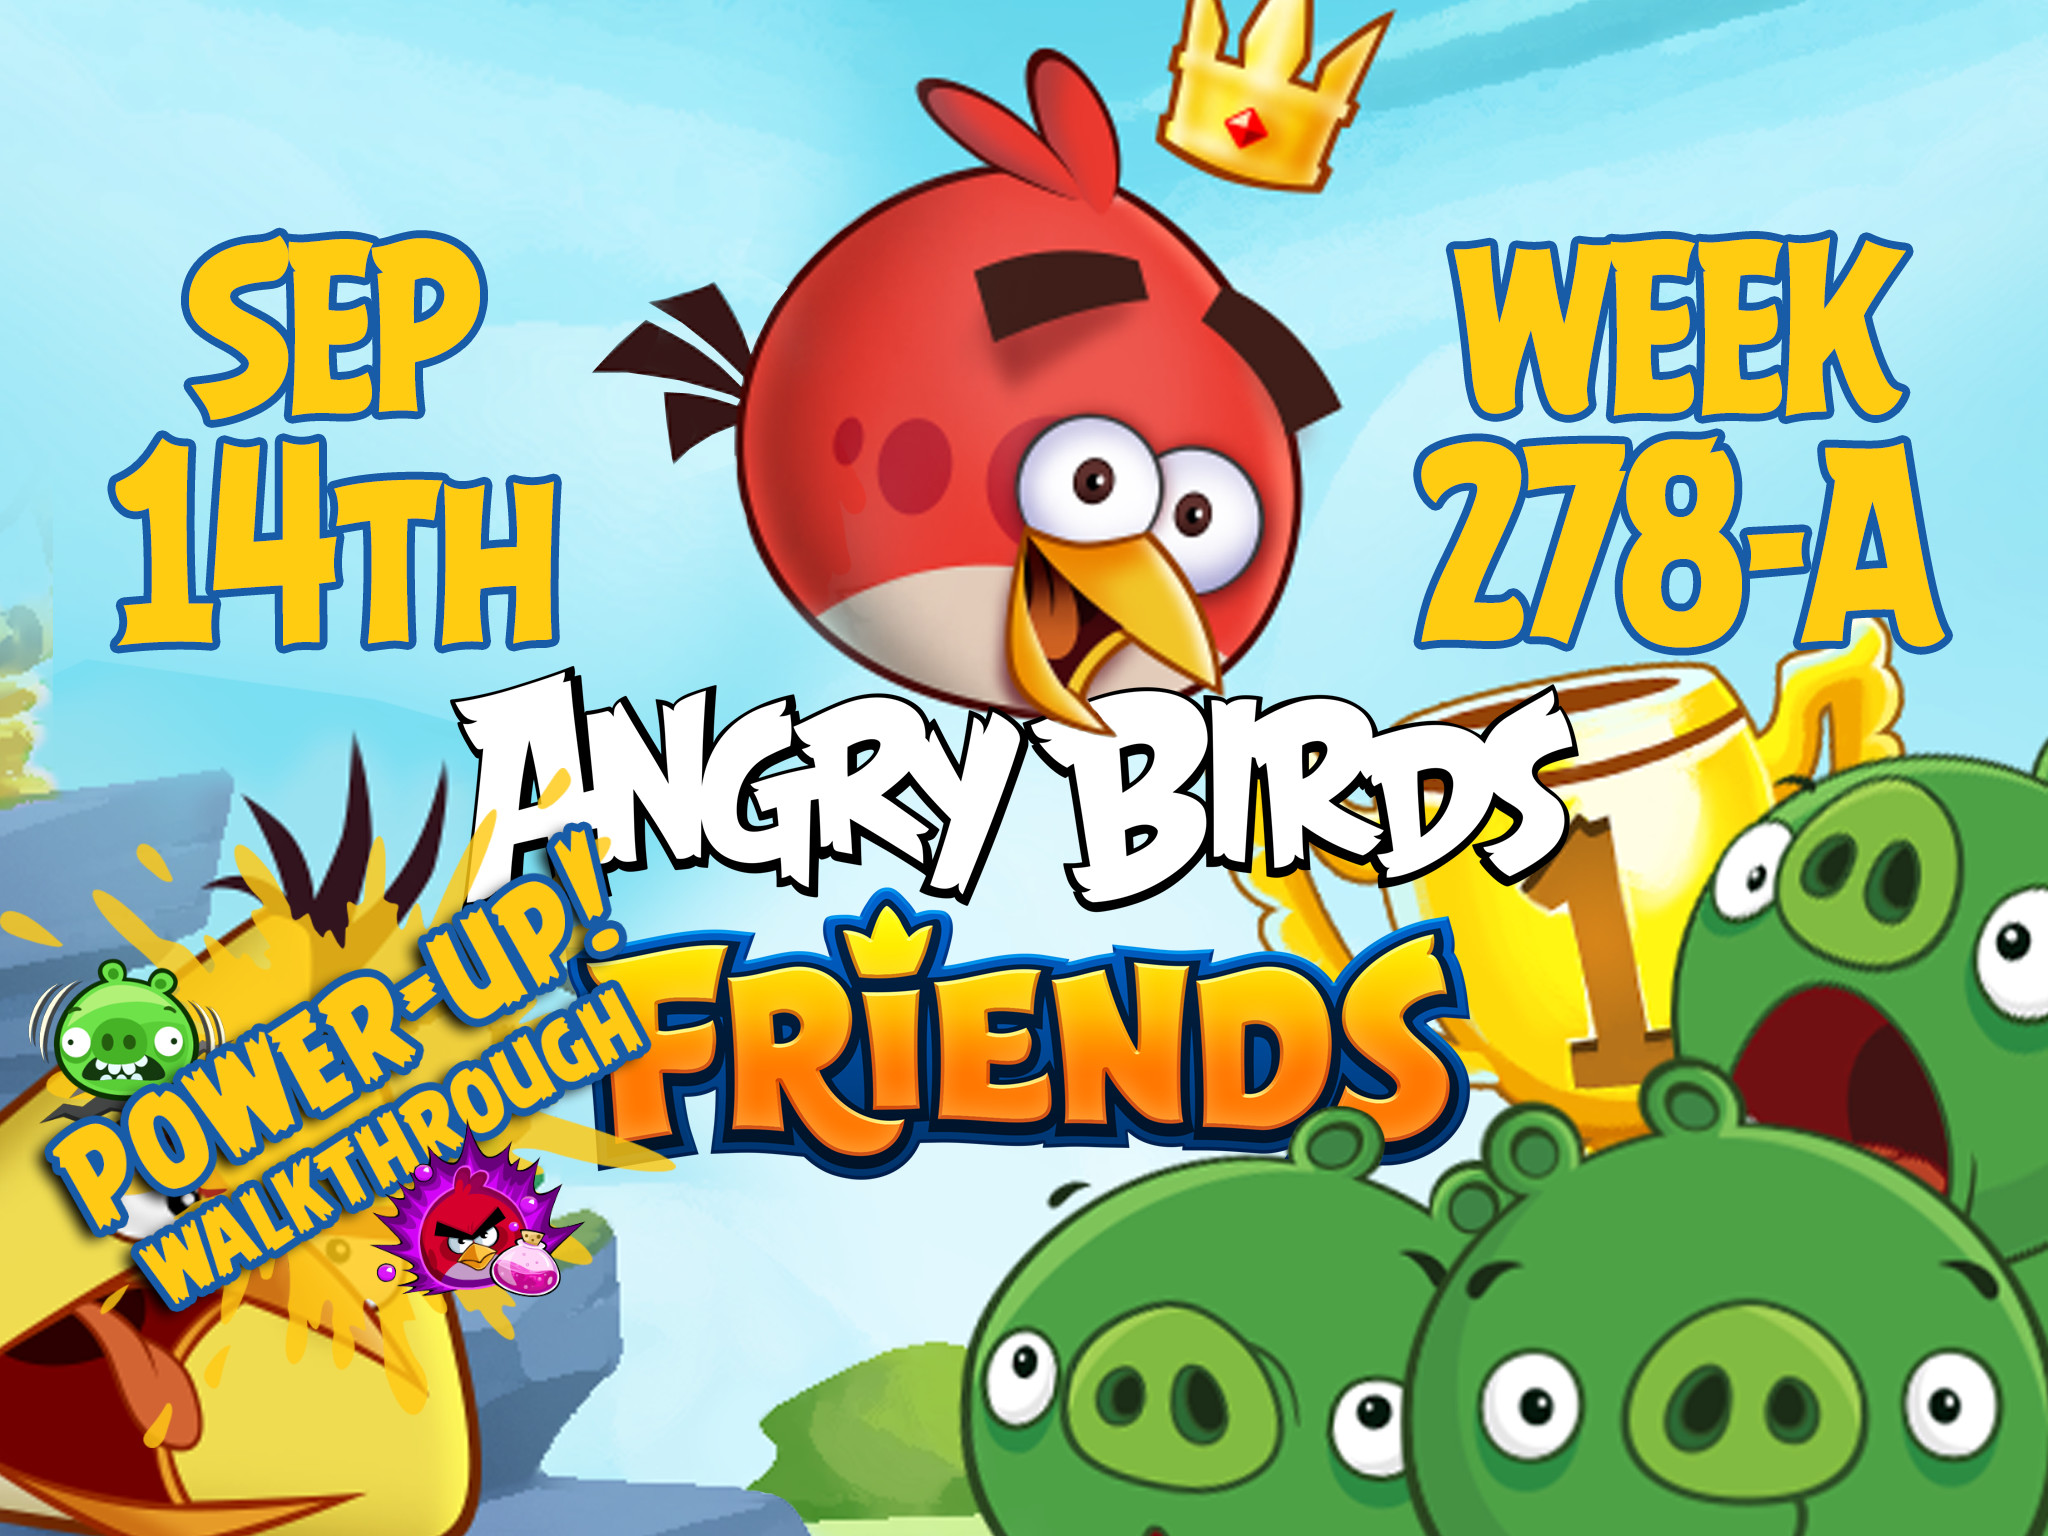 Angry Birds Friends Tournament Week 278-A Feature Image PU